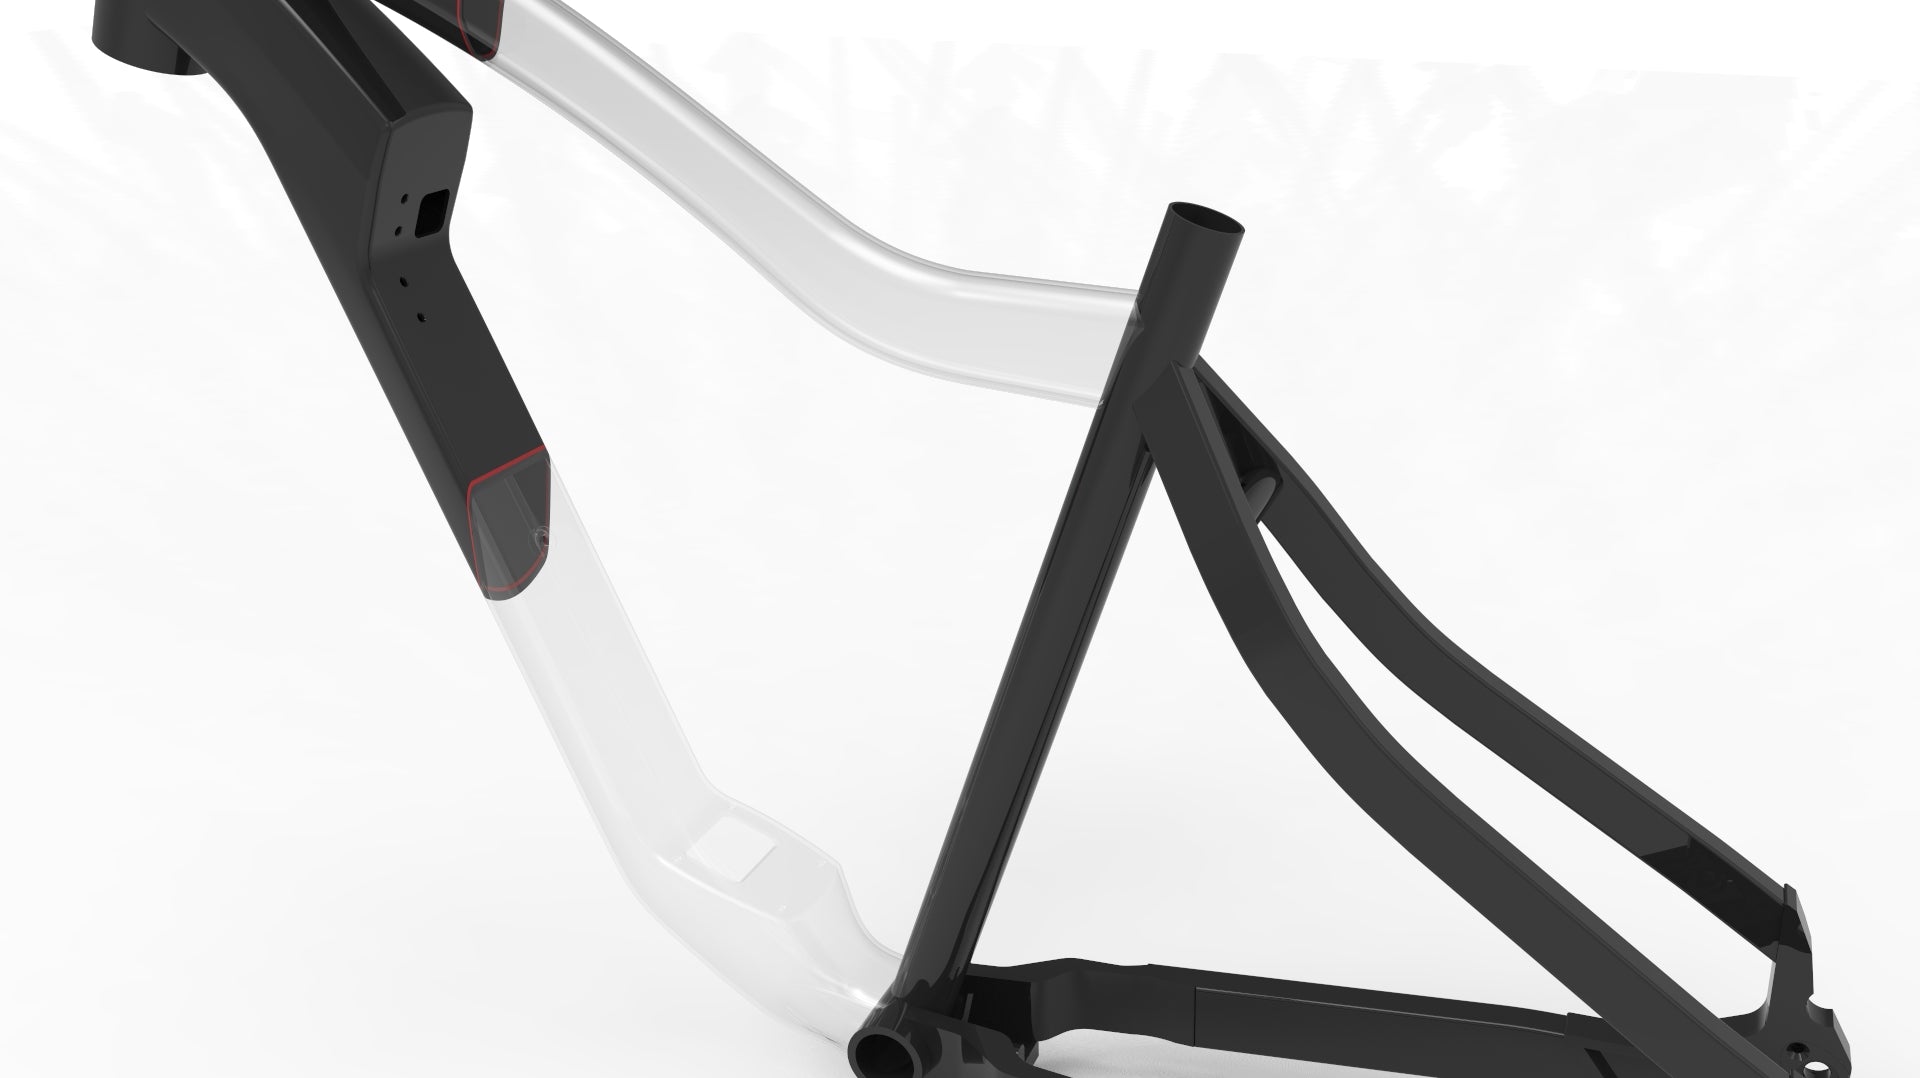 The Benefits of Hydroformed Electric Bicycle Frames